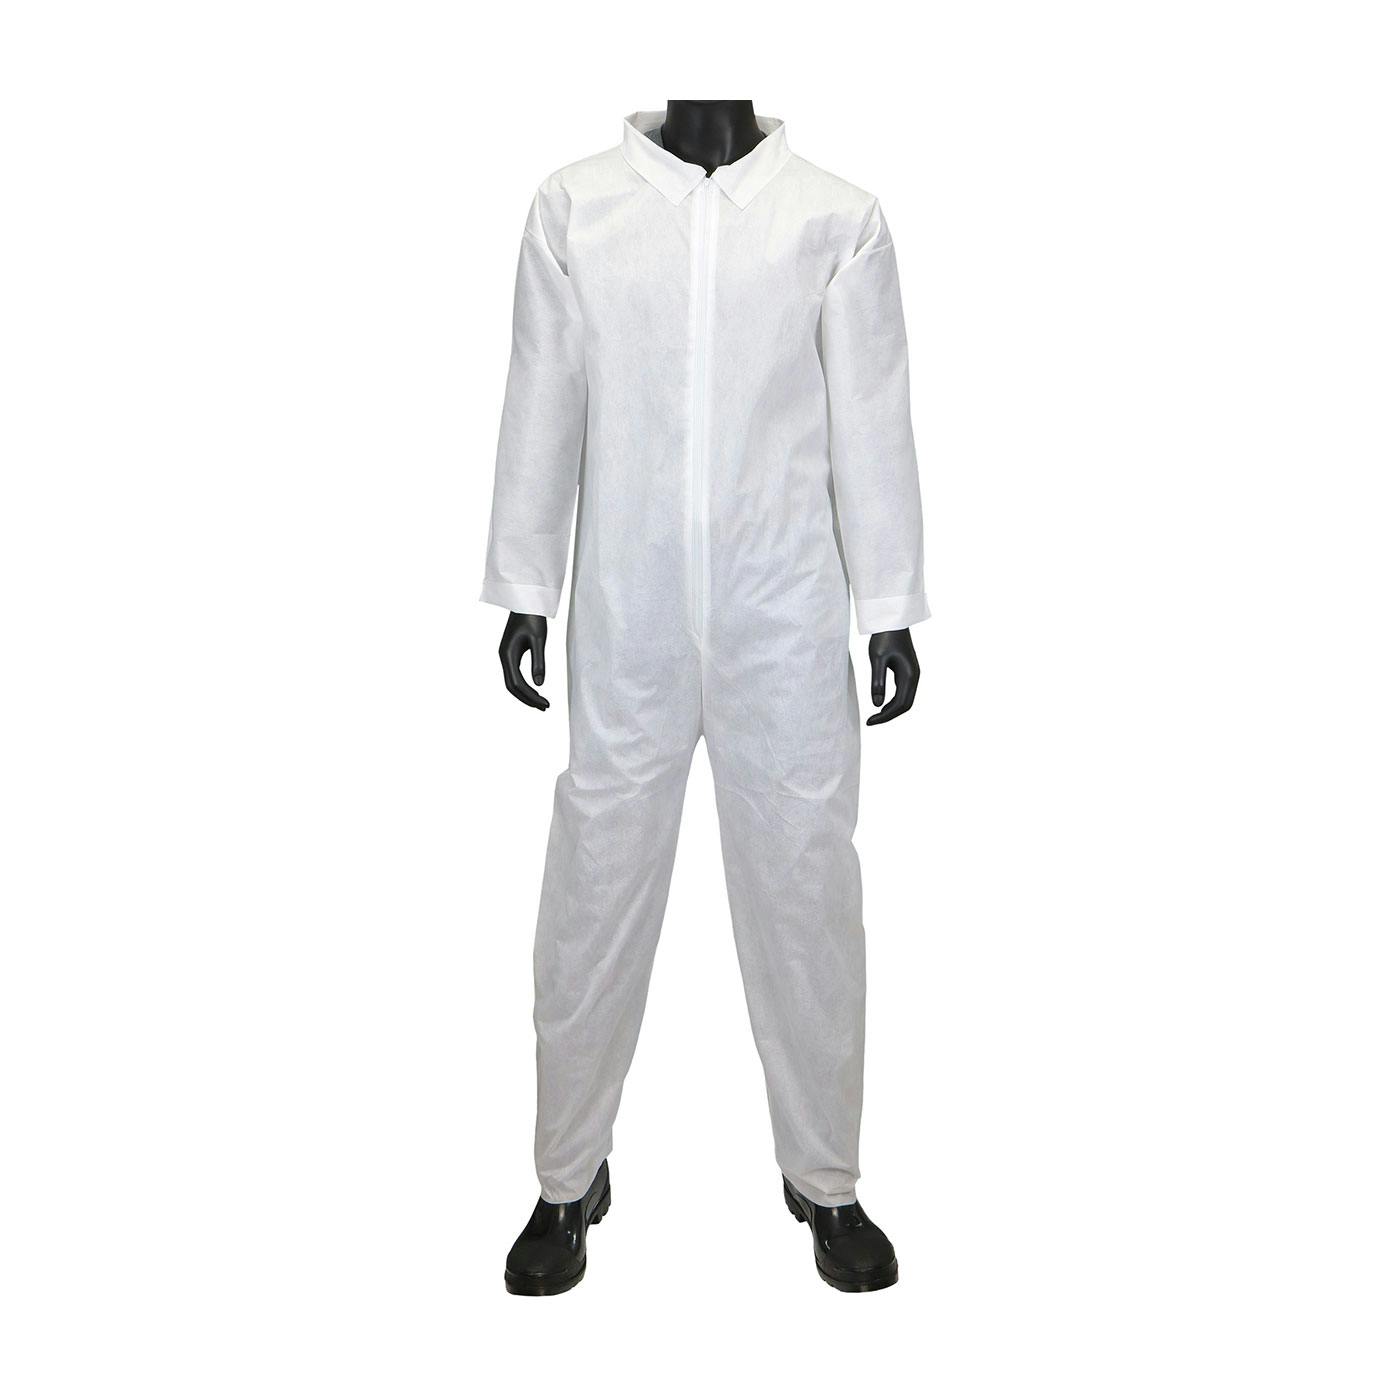 SMS - Basic Coverall 42 gsm, White (C3850)